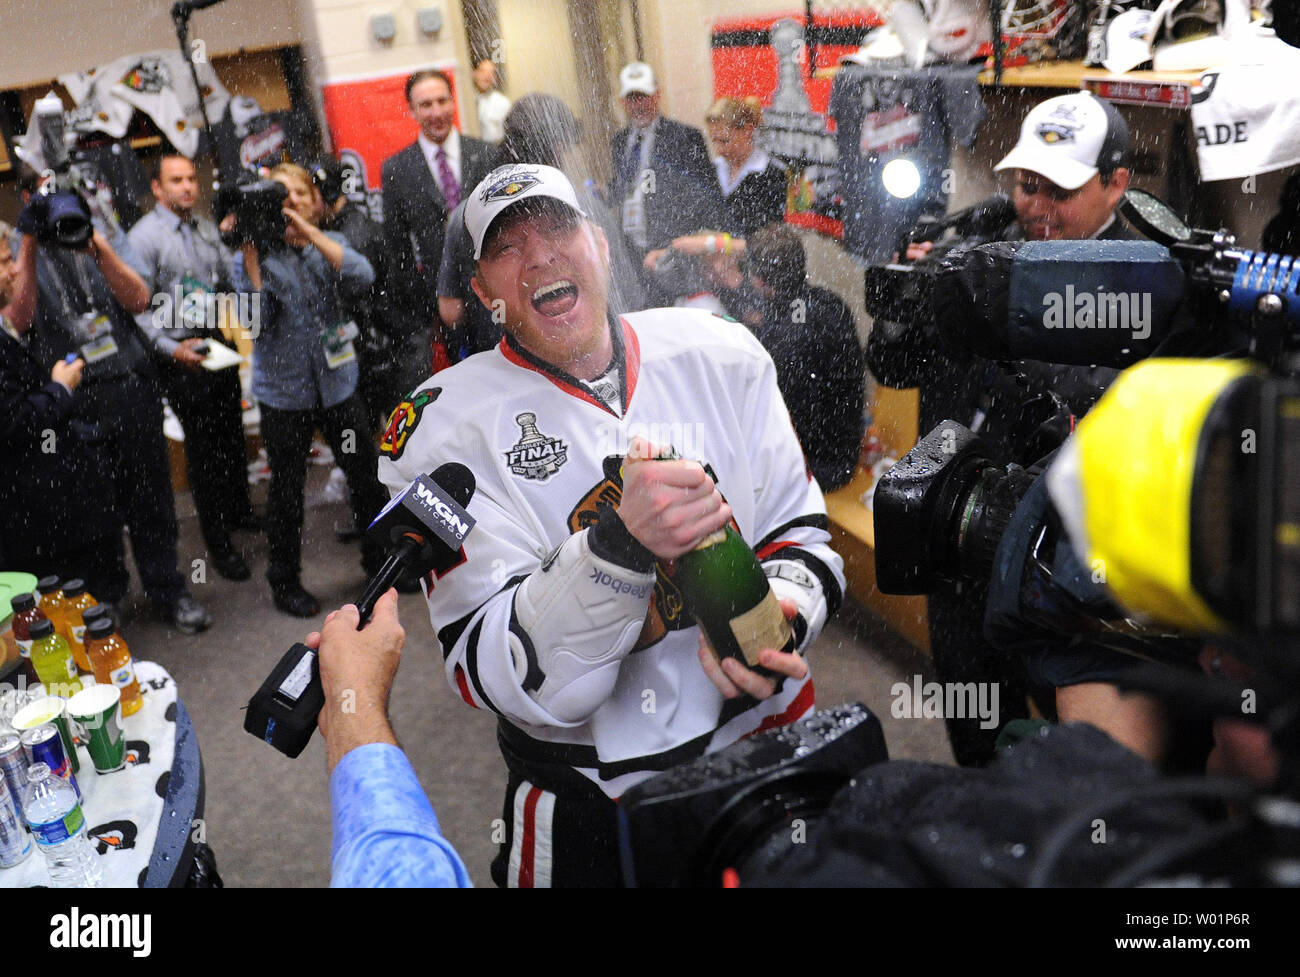 Chicago Blackhawks right wing Marian Hossa celebrates in the locker room after the Blackhawks won the Stanley Cup defeating the Philadelphia Flyers 4-3 during game six of the 2010 Stanley Cup Final in Philadelphia on June 9, 2010. UPI/Kevin Dietsch Stock Photo